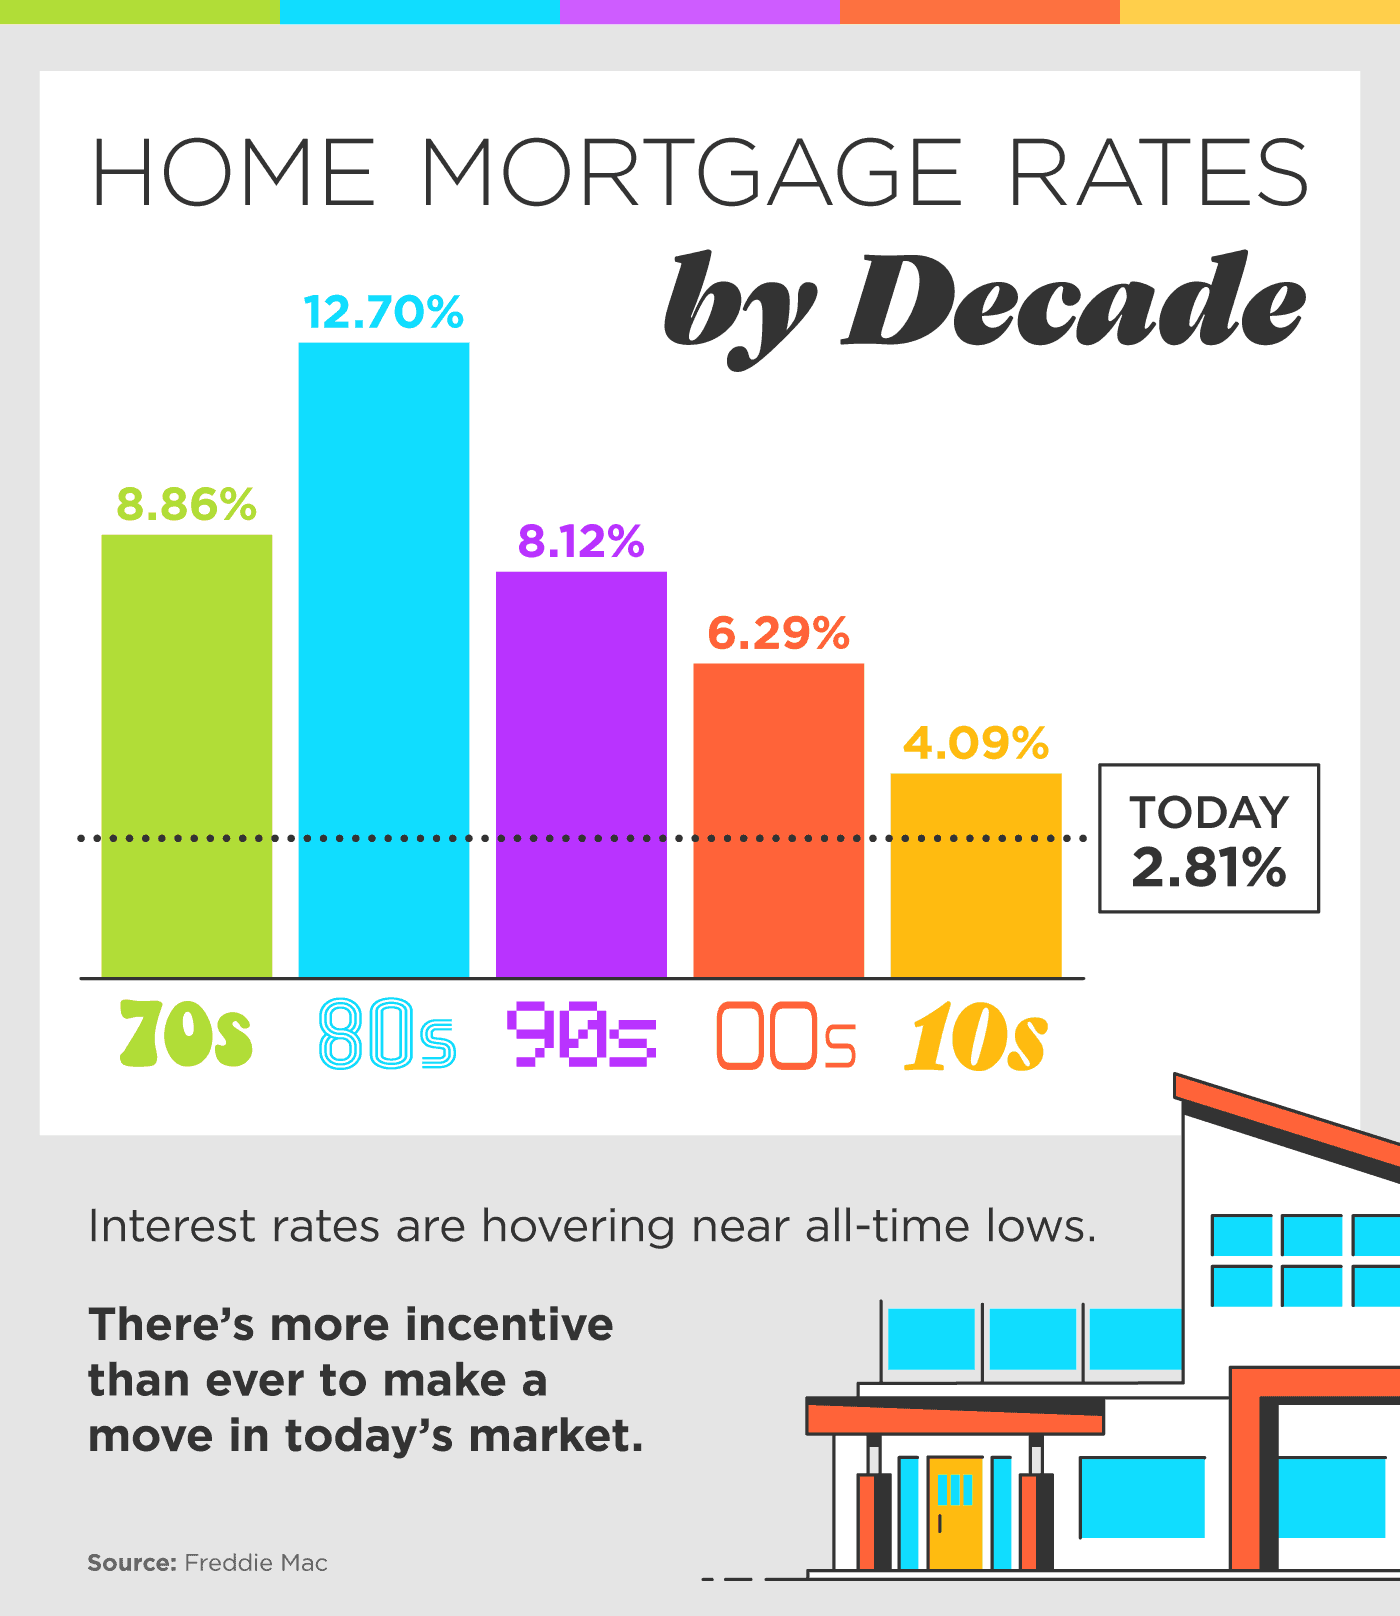 Home Mortgage rates by Decade INFOGRAPHIC